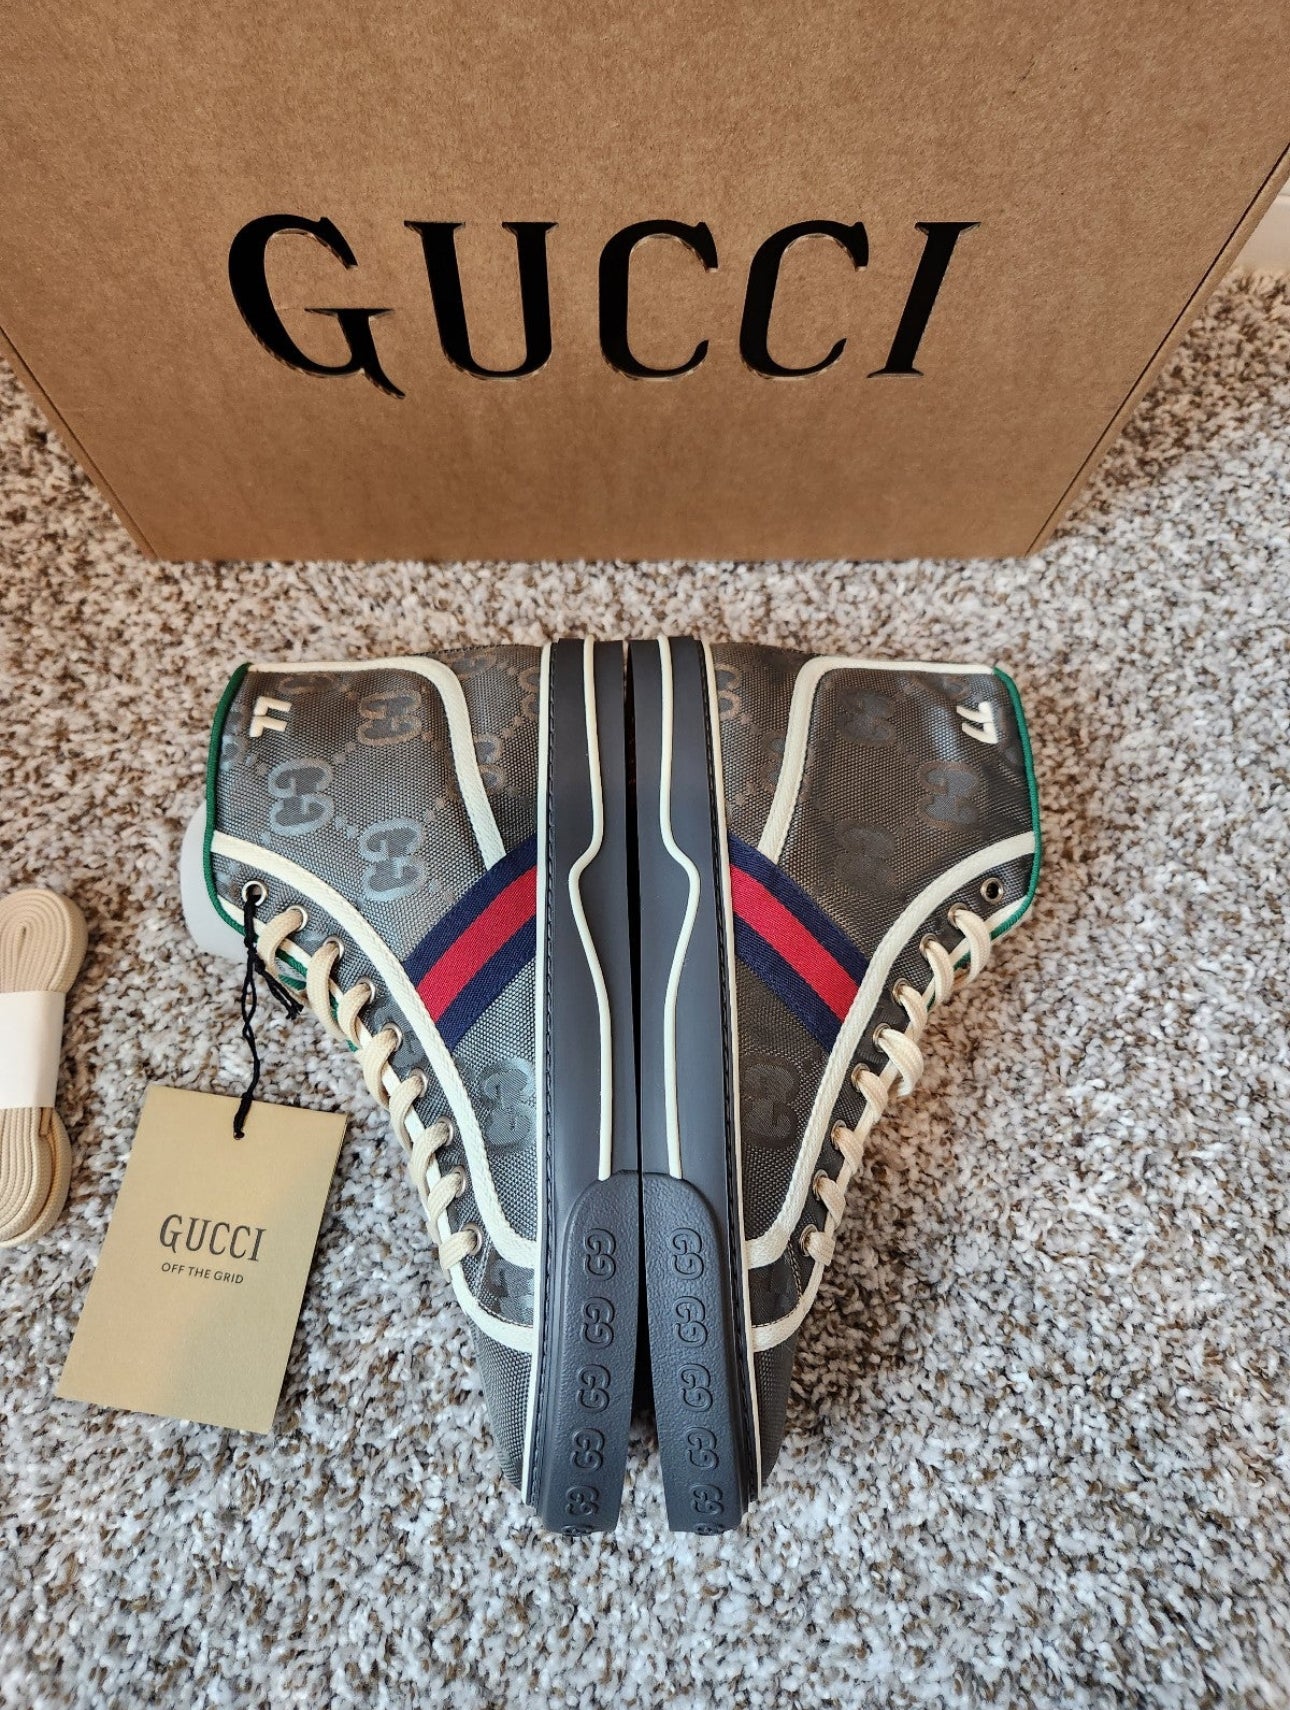 GUCCI Off The Grid High 1977 Tennis Mens Sneakers / Shoes